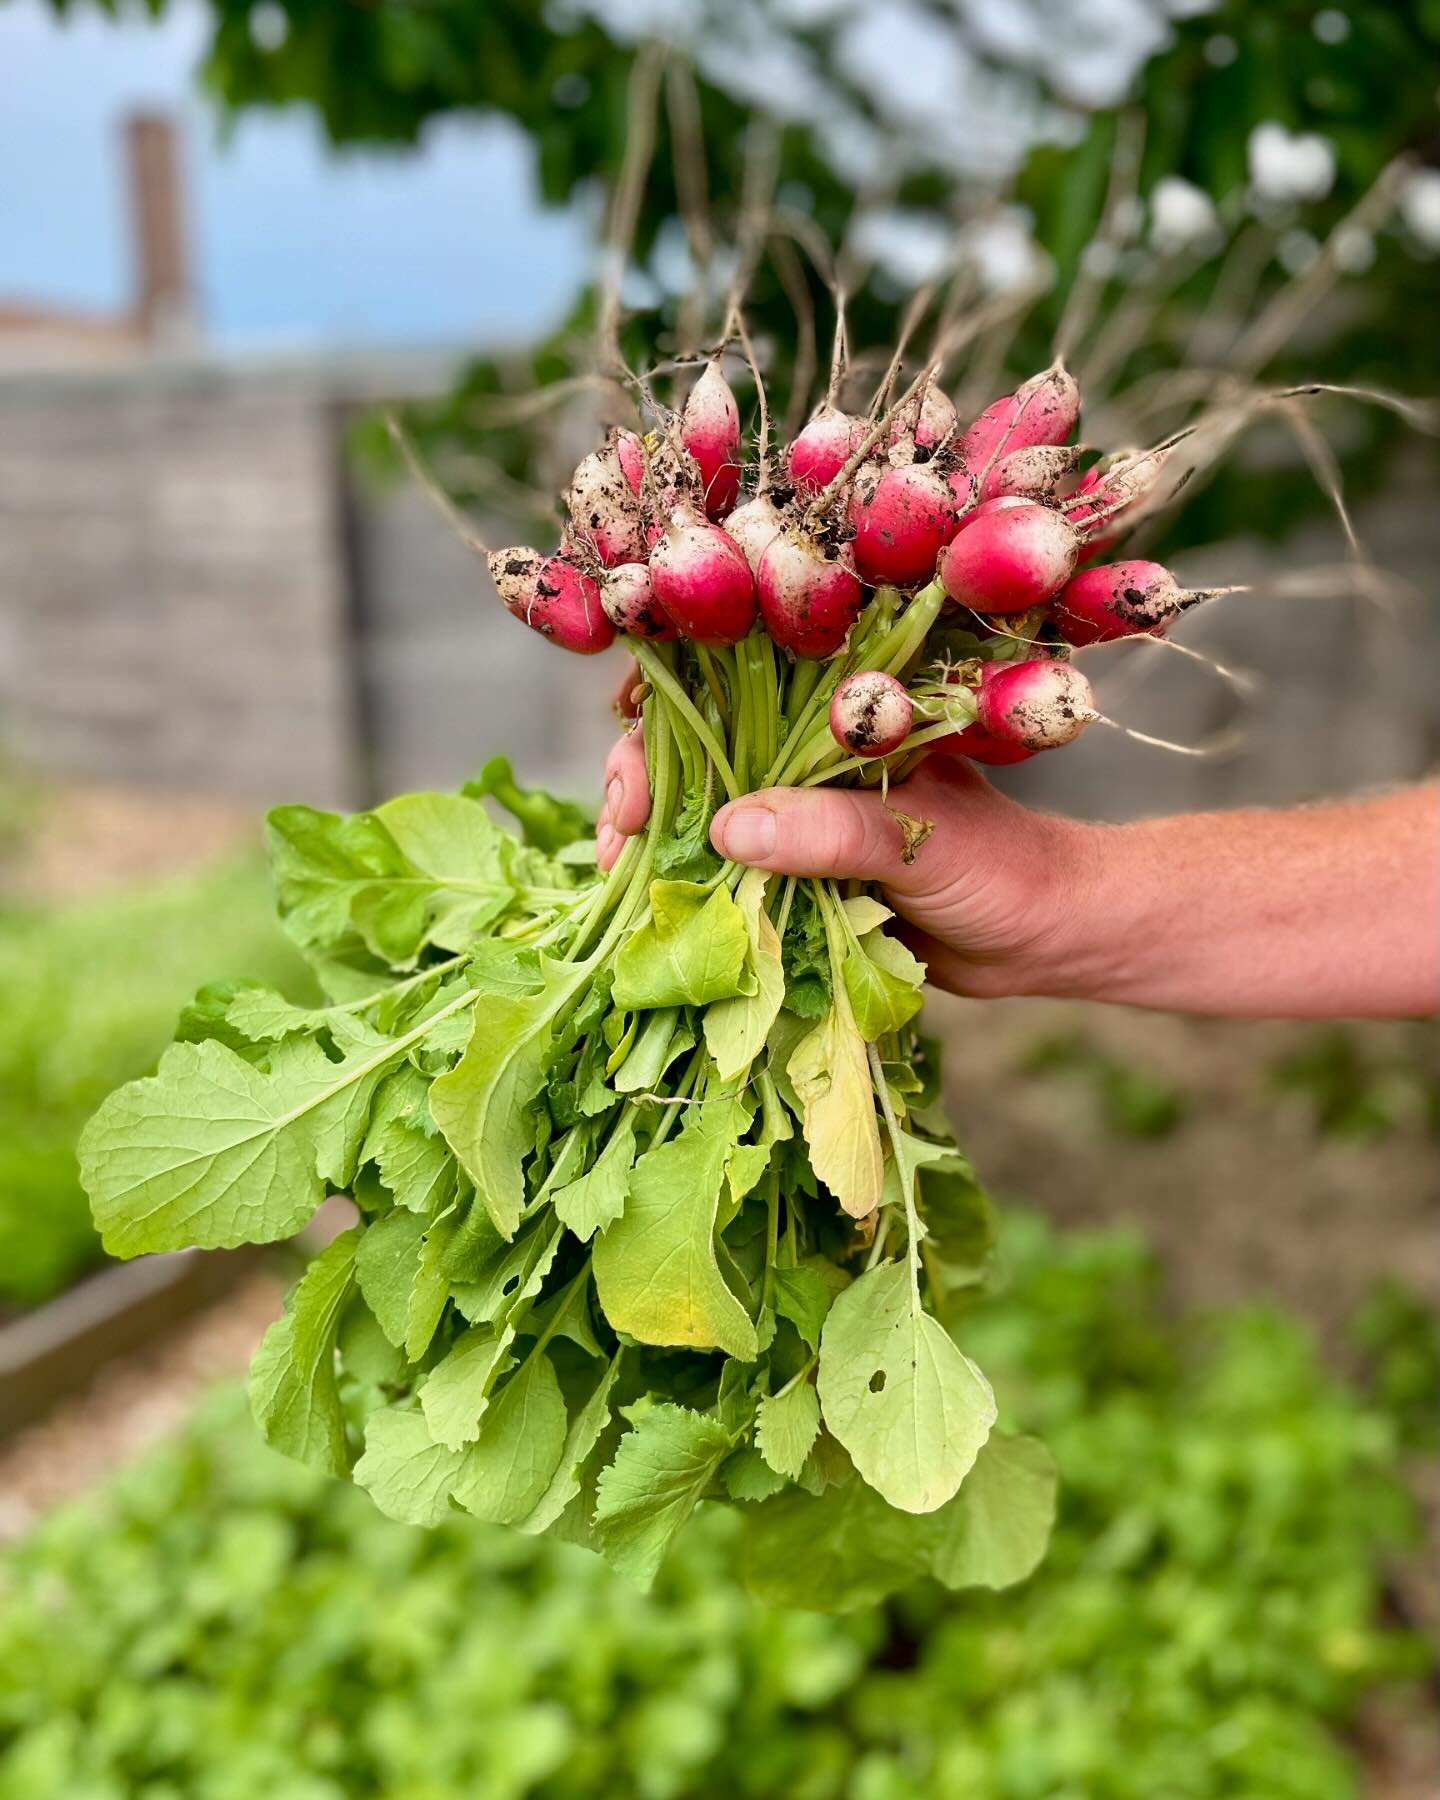 Happy Monday from The BDP Urban Farm! 🌿 

Dylan was hard at work today harvesting these pretty French breakfast and Easter egg radishes, rhubarb, and tons of spring greens! 

Swipe to see the pretty chive blossoms that are blooming! 💜🐝